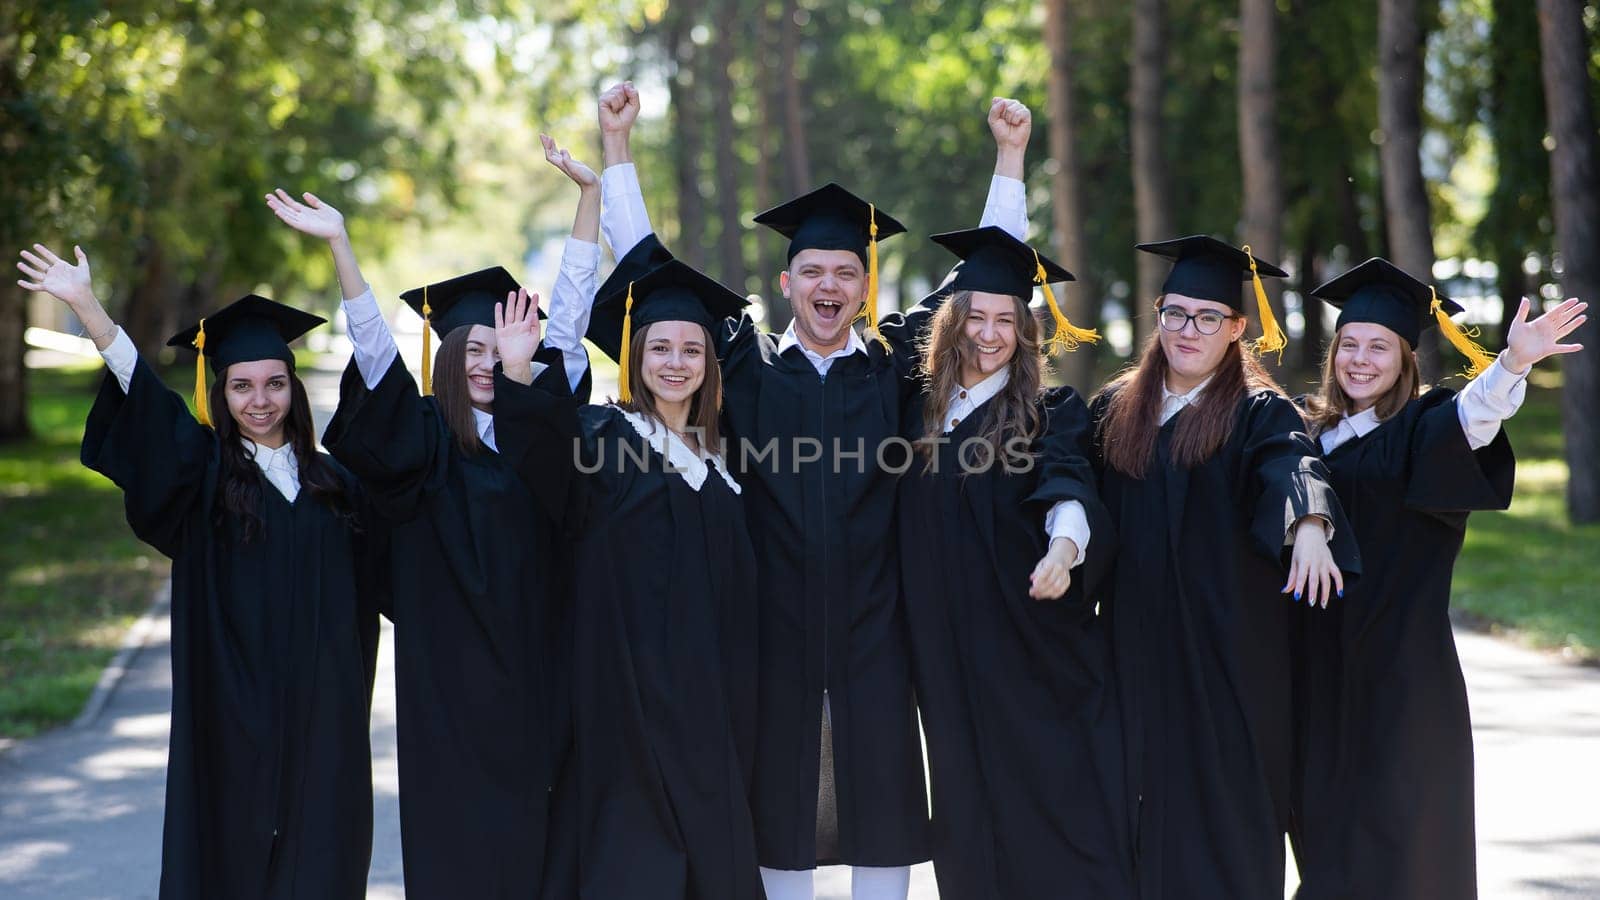 Group of happy graduates in robes outdoors